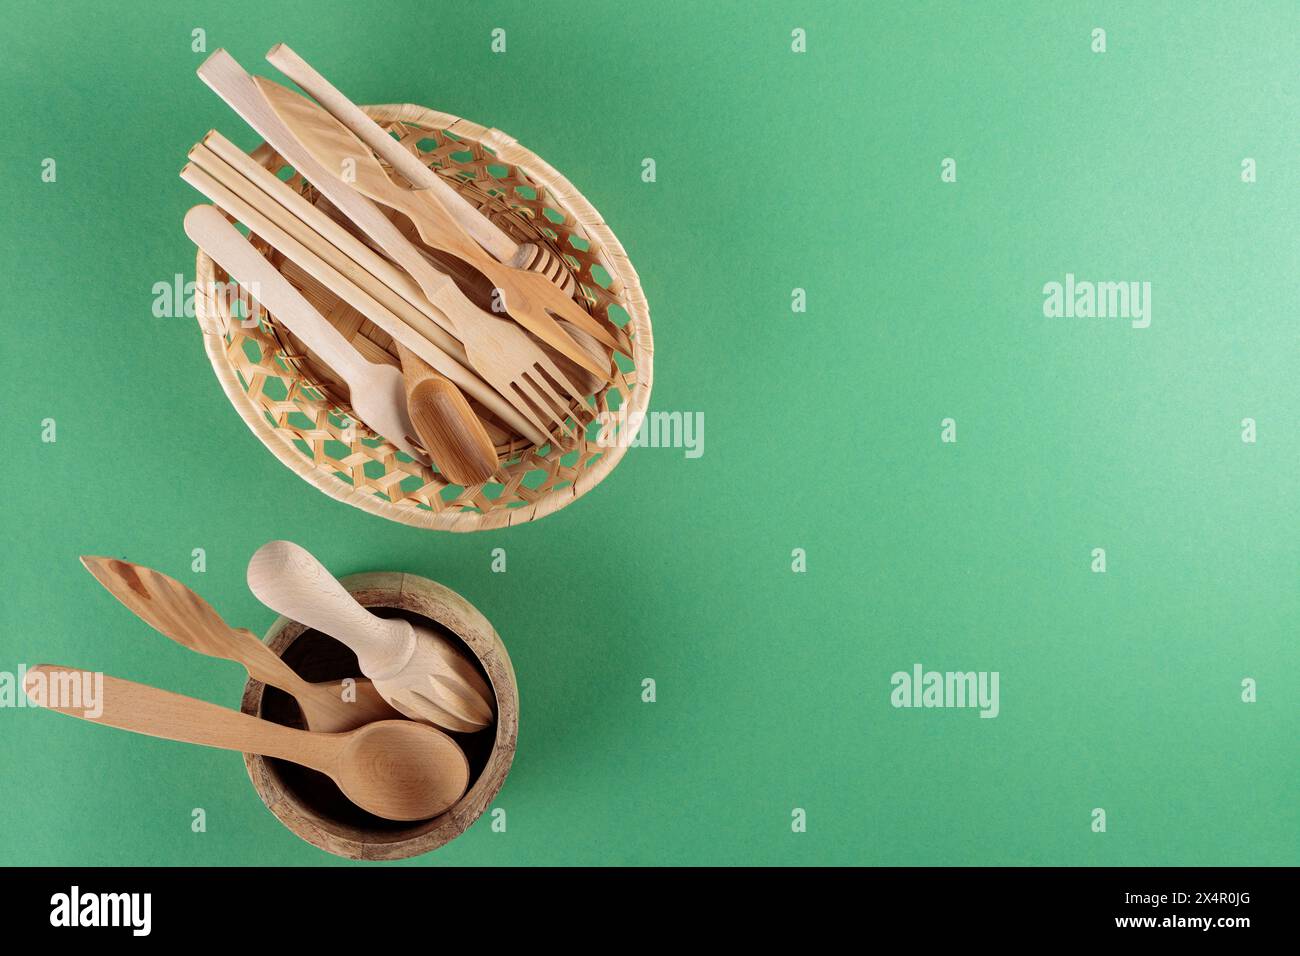 Wooden Kitchen Utensils Collection in Wicker Basket on Green Background, Top View, Copy Space Stock Photo